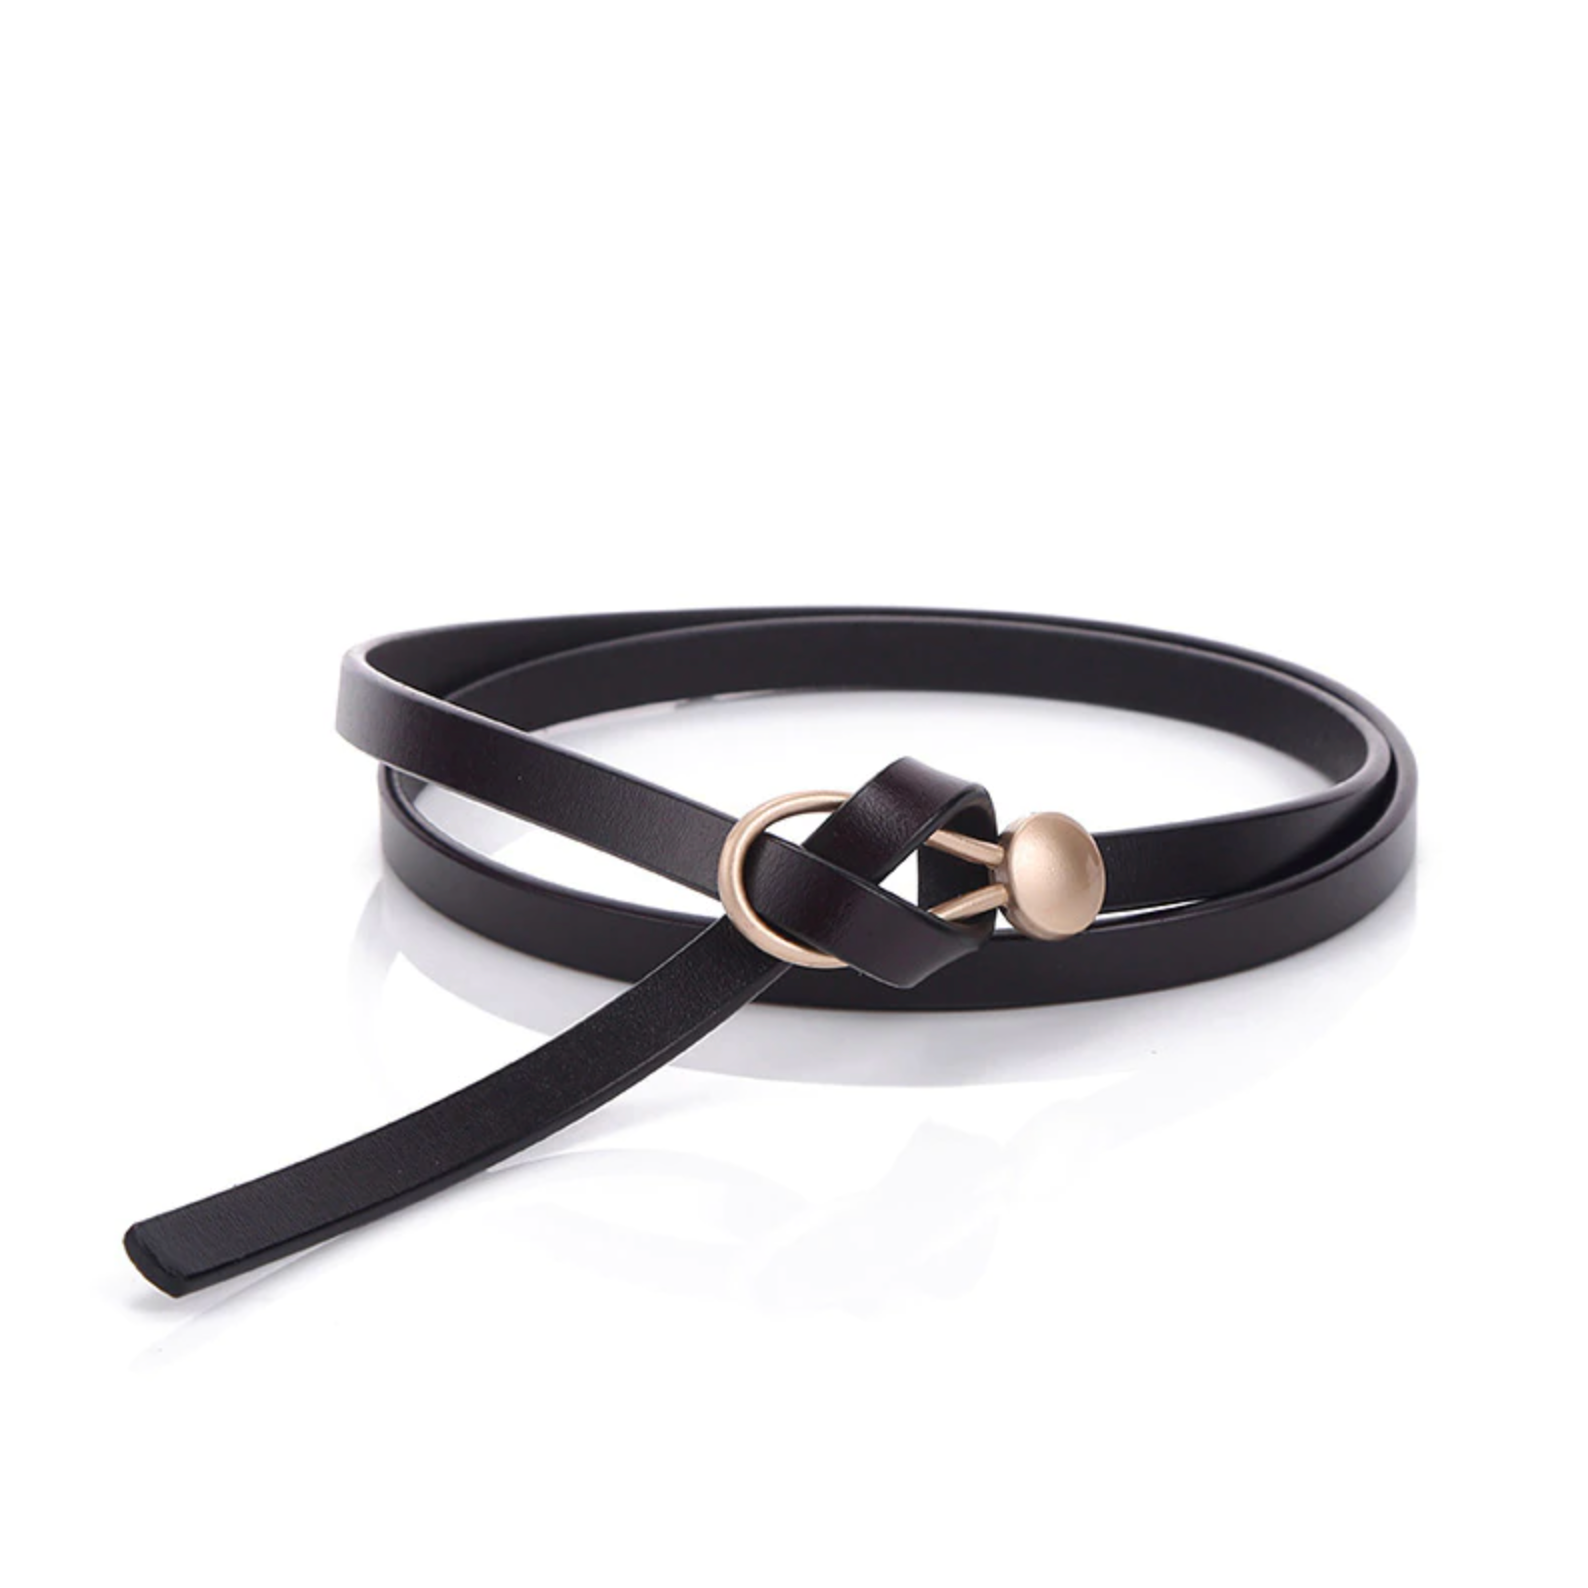 Marie-Caley Luxurious Leather Belt